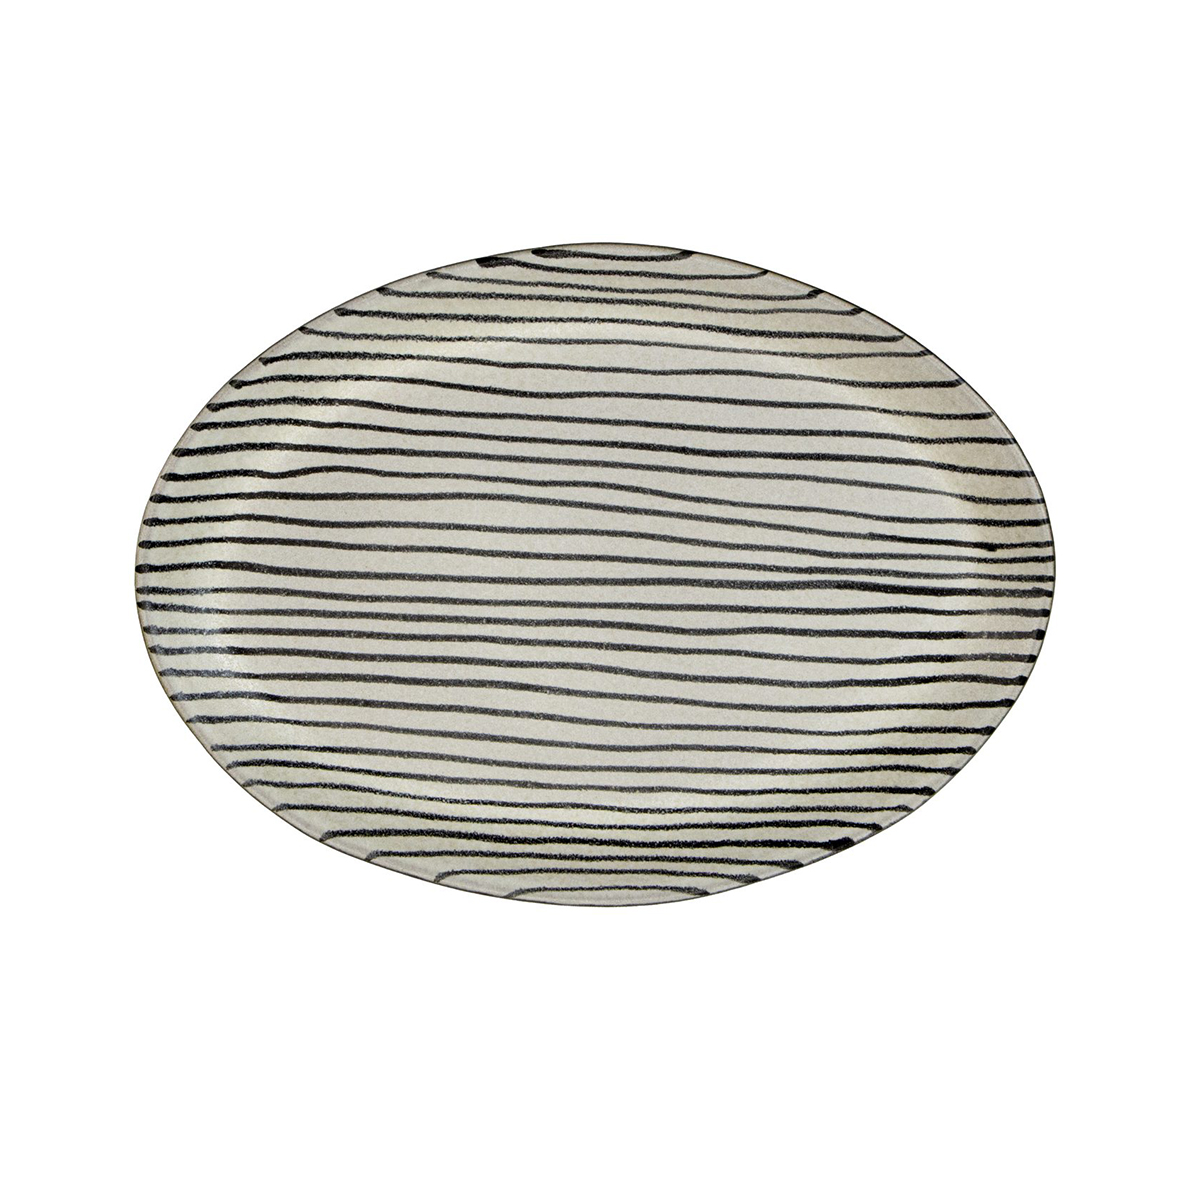 DARQUE SMALL PLATTER WITH FINE STRIPES